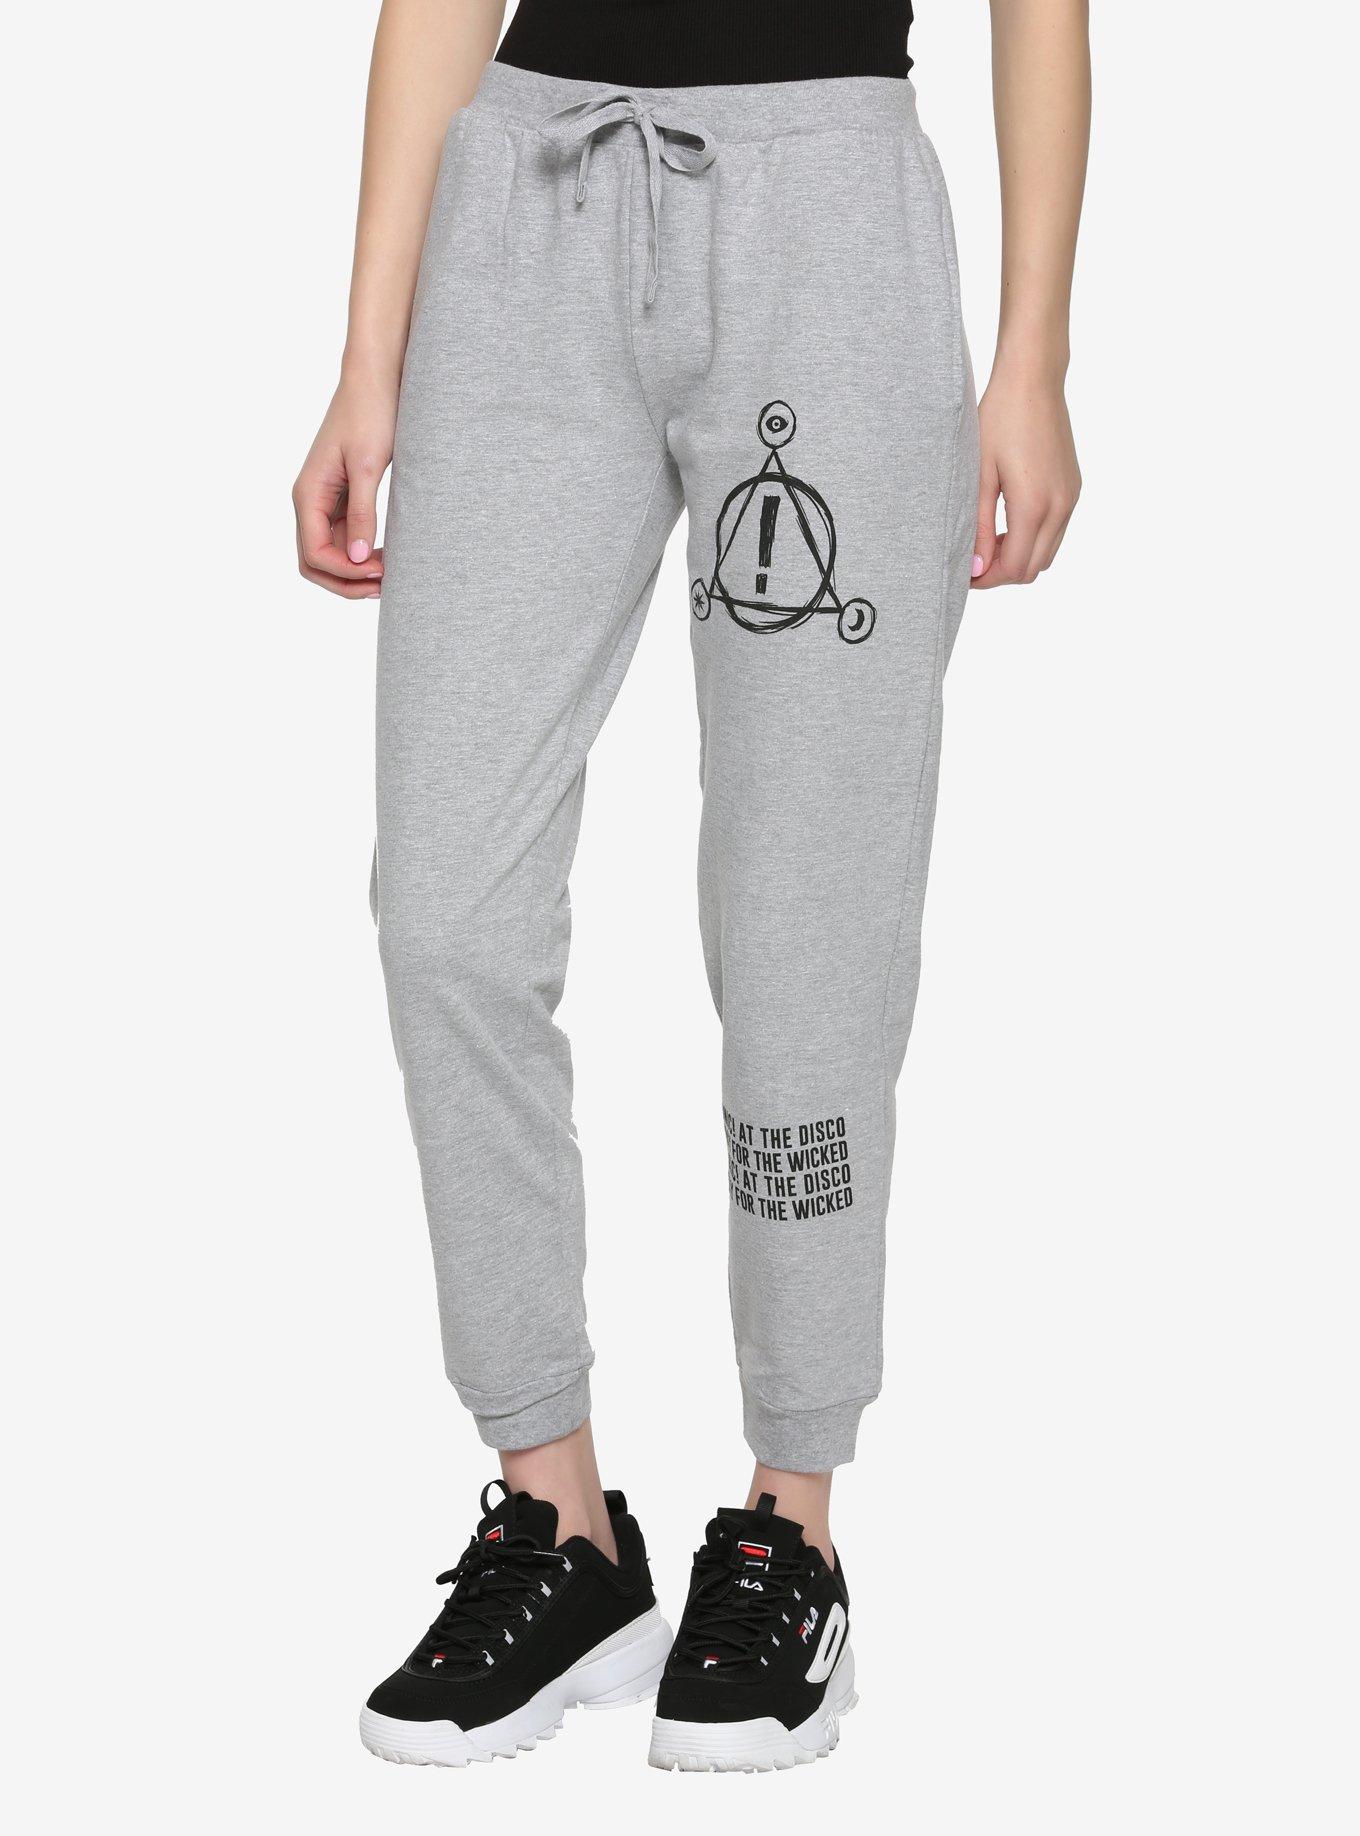 Panic! At The Disco Pray For The Wicked Grey Girls Jogger Pants, GREY, hi-res